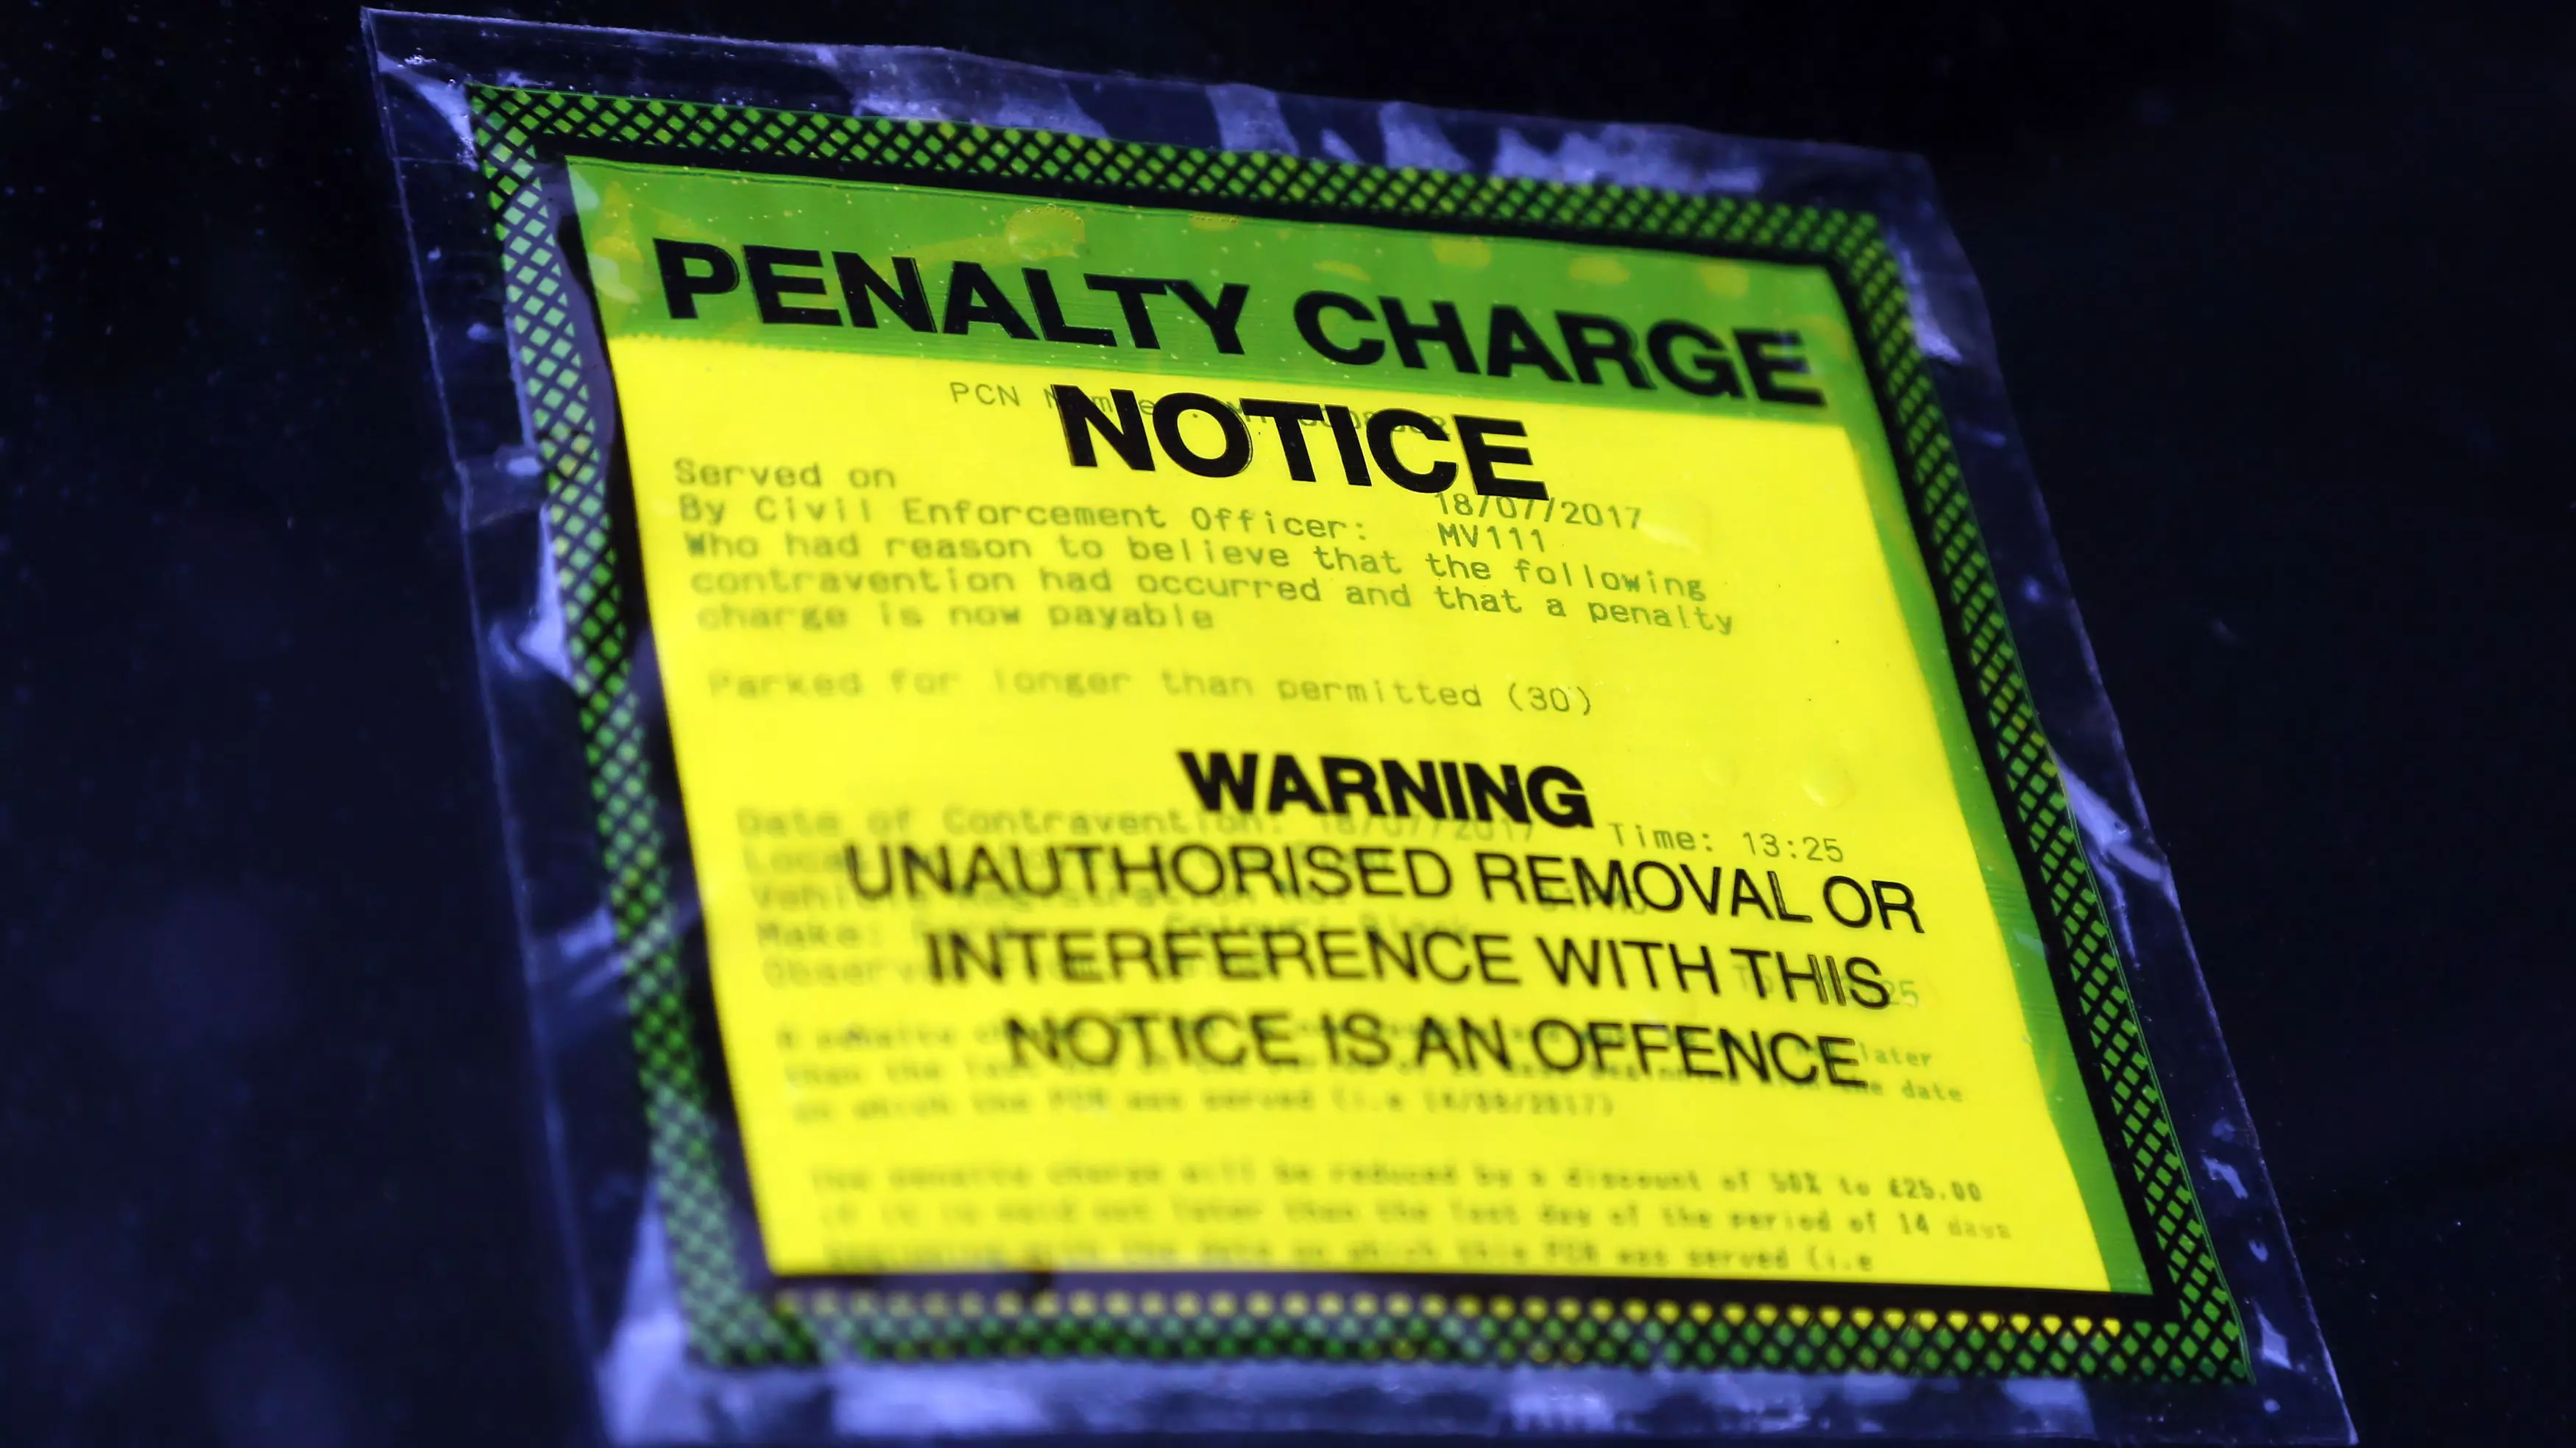 Foreign Car Picks Up £8,000 In Parking Fines Across 119 Tickets